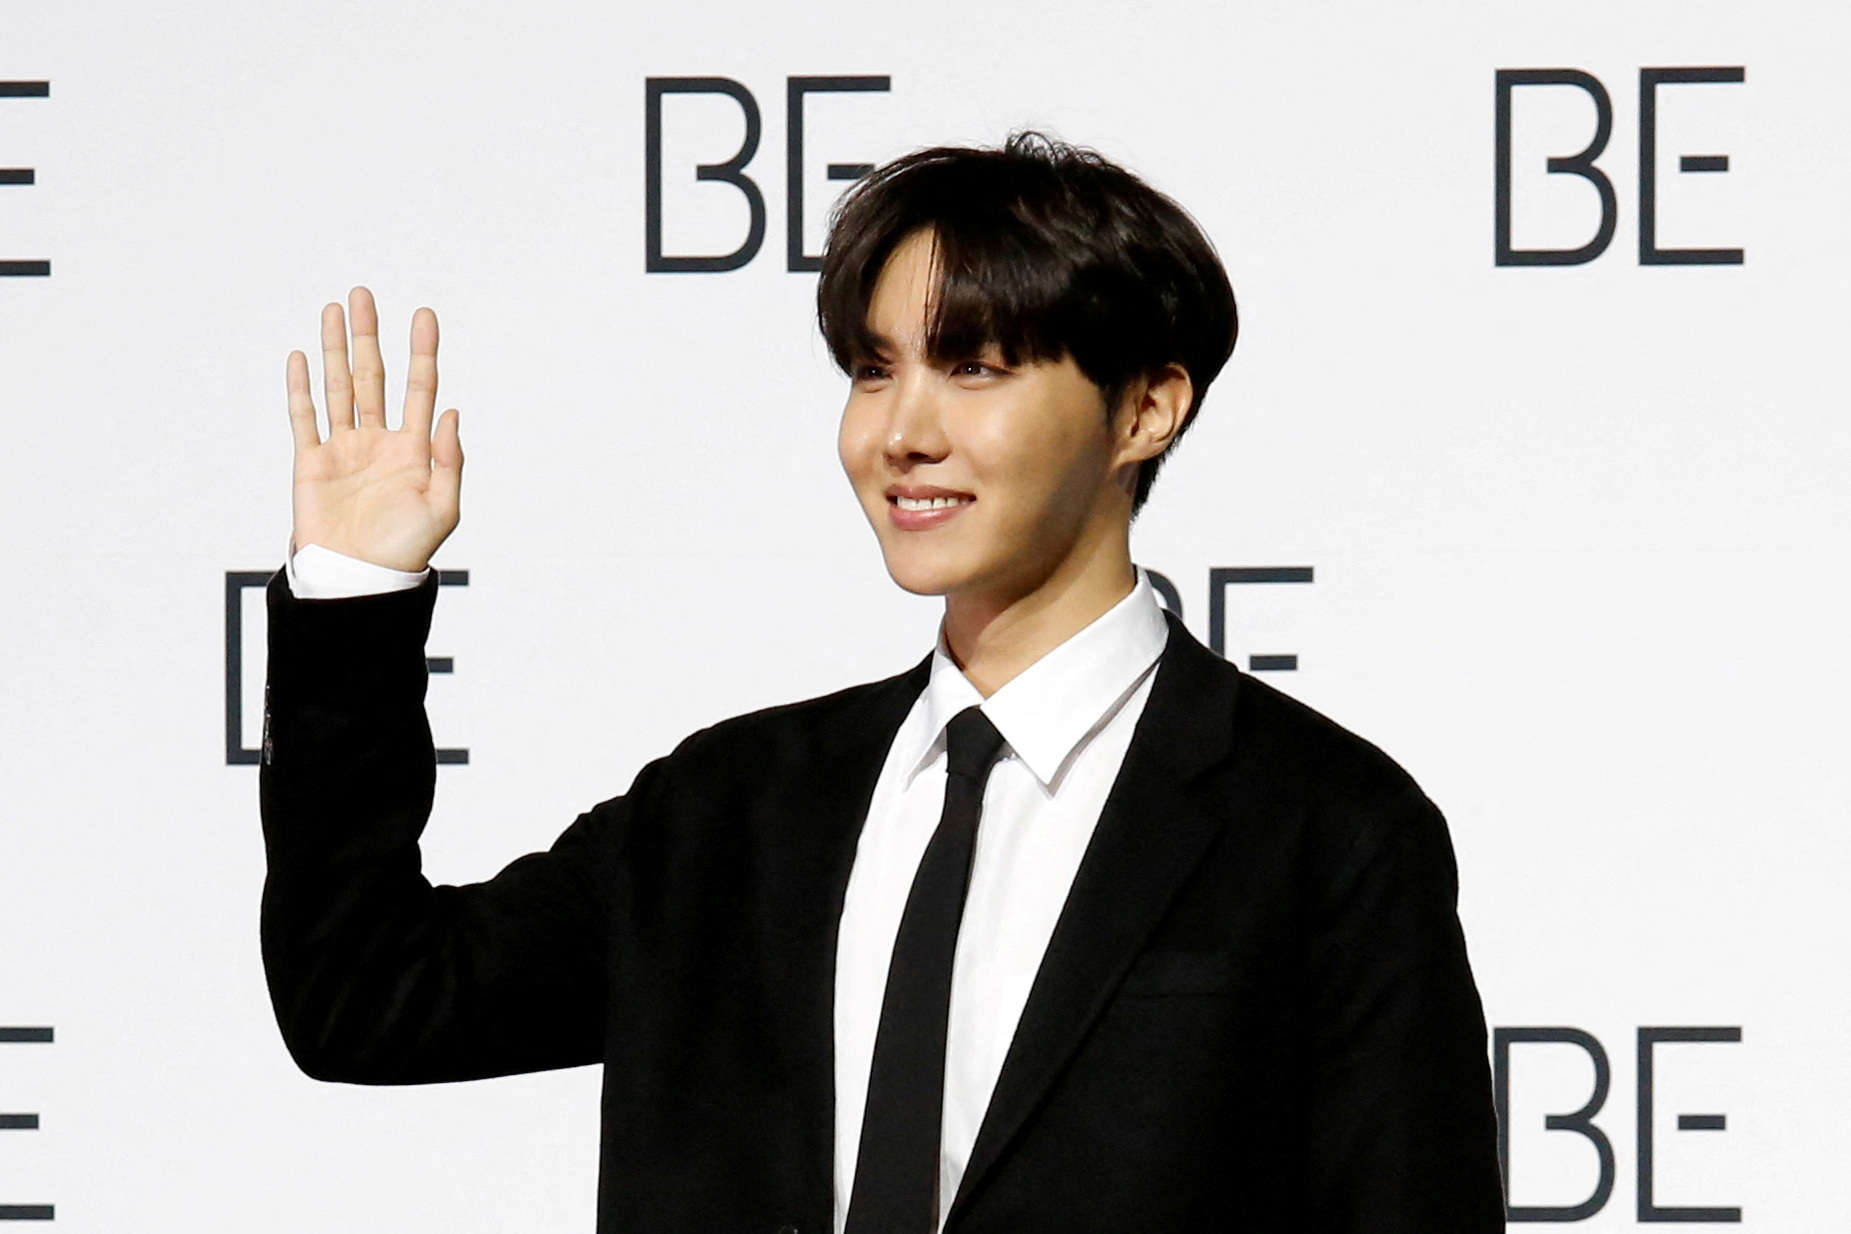 BTS's j-hope will reportedly enlist for military service on April